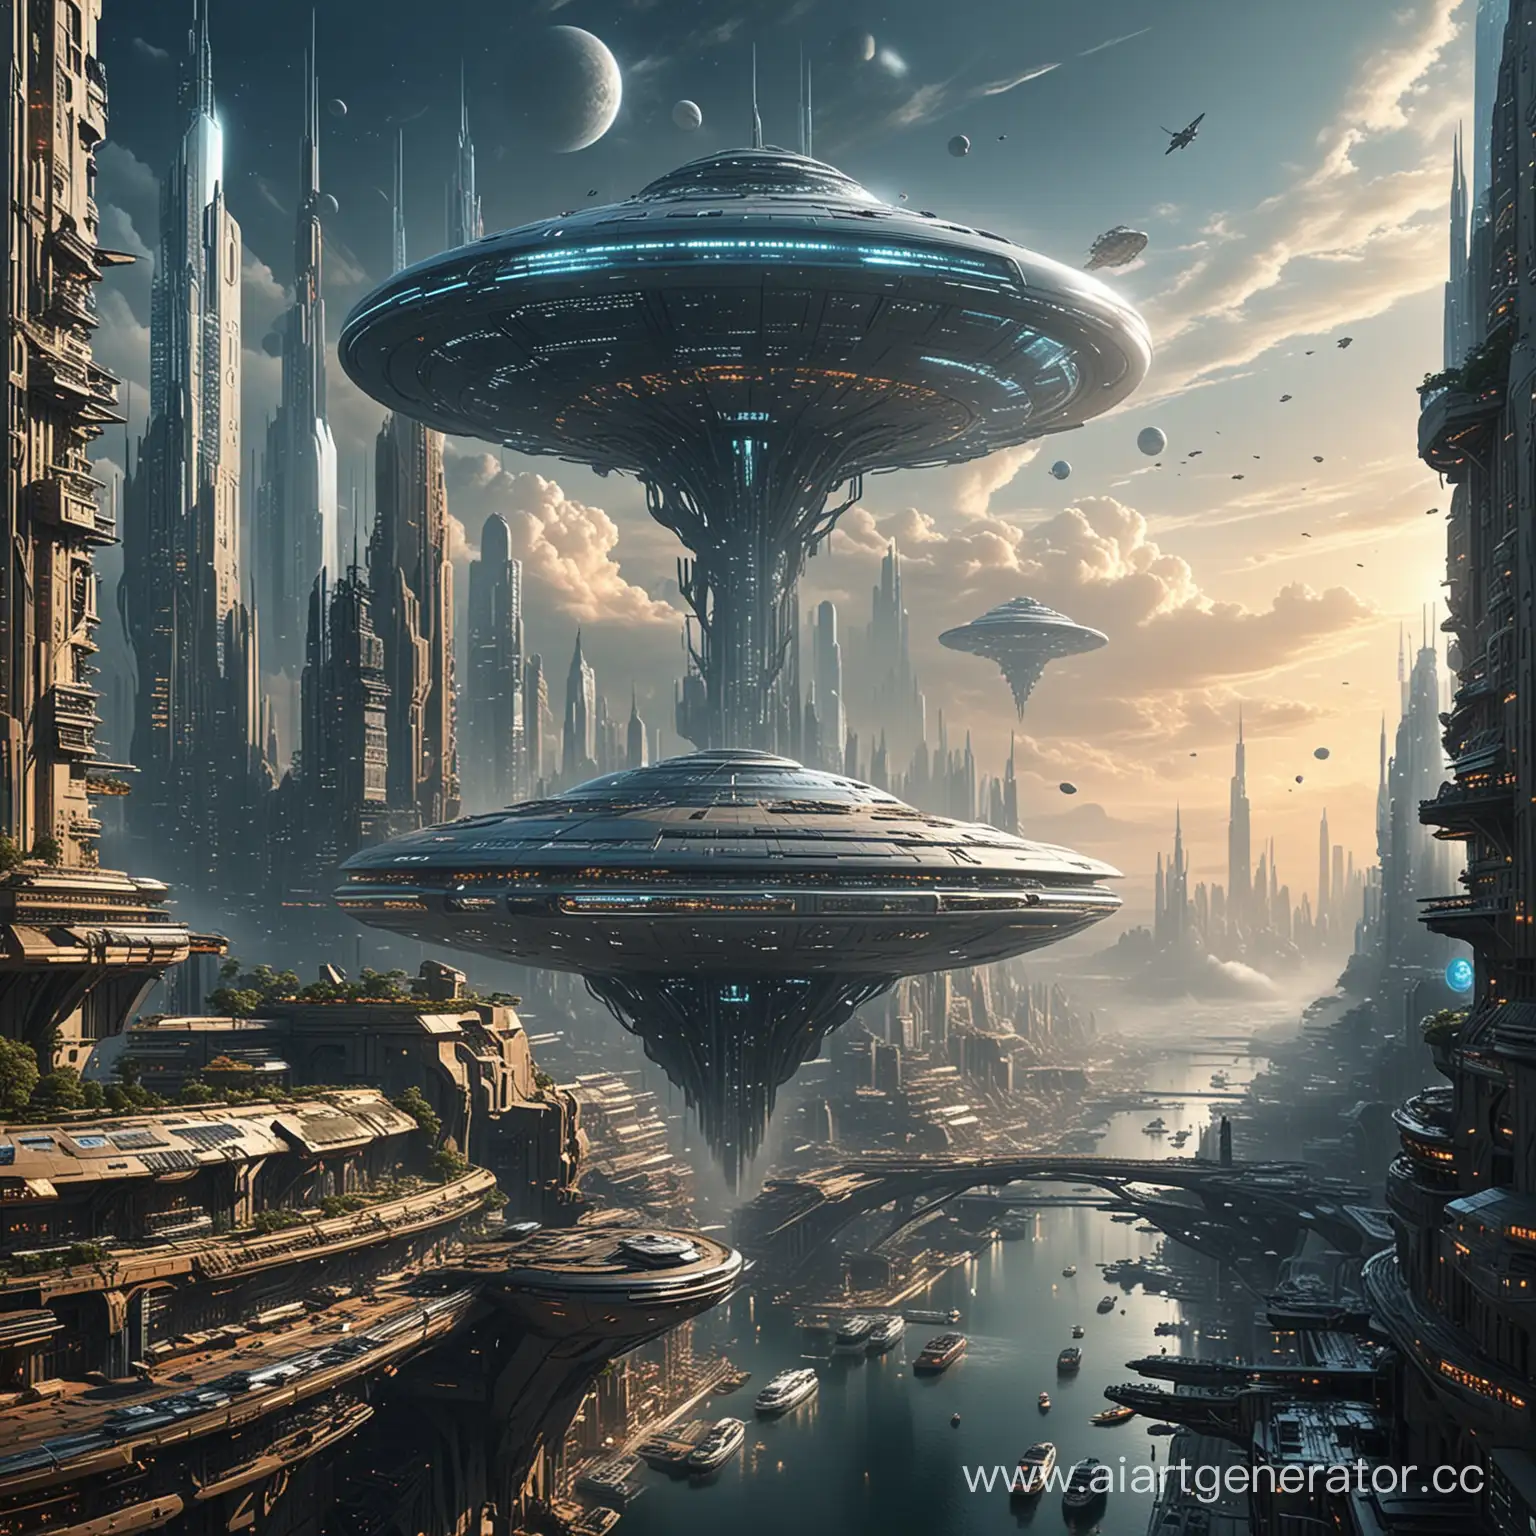 Futuristic-Cityscape-with-Interstellar-Travelers-and-Advanced-Medical-Facilities